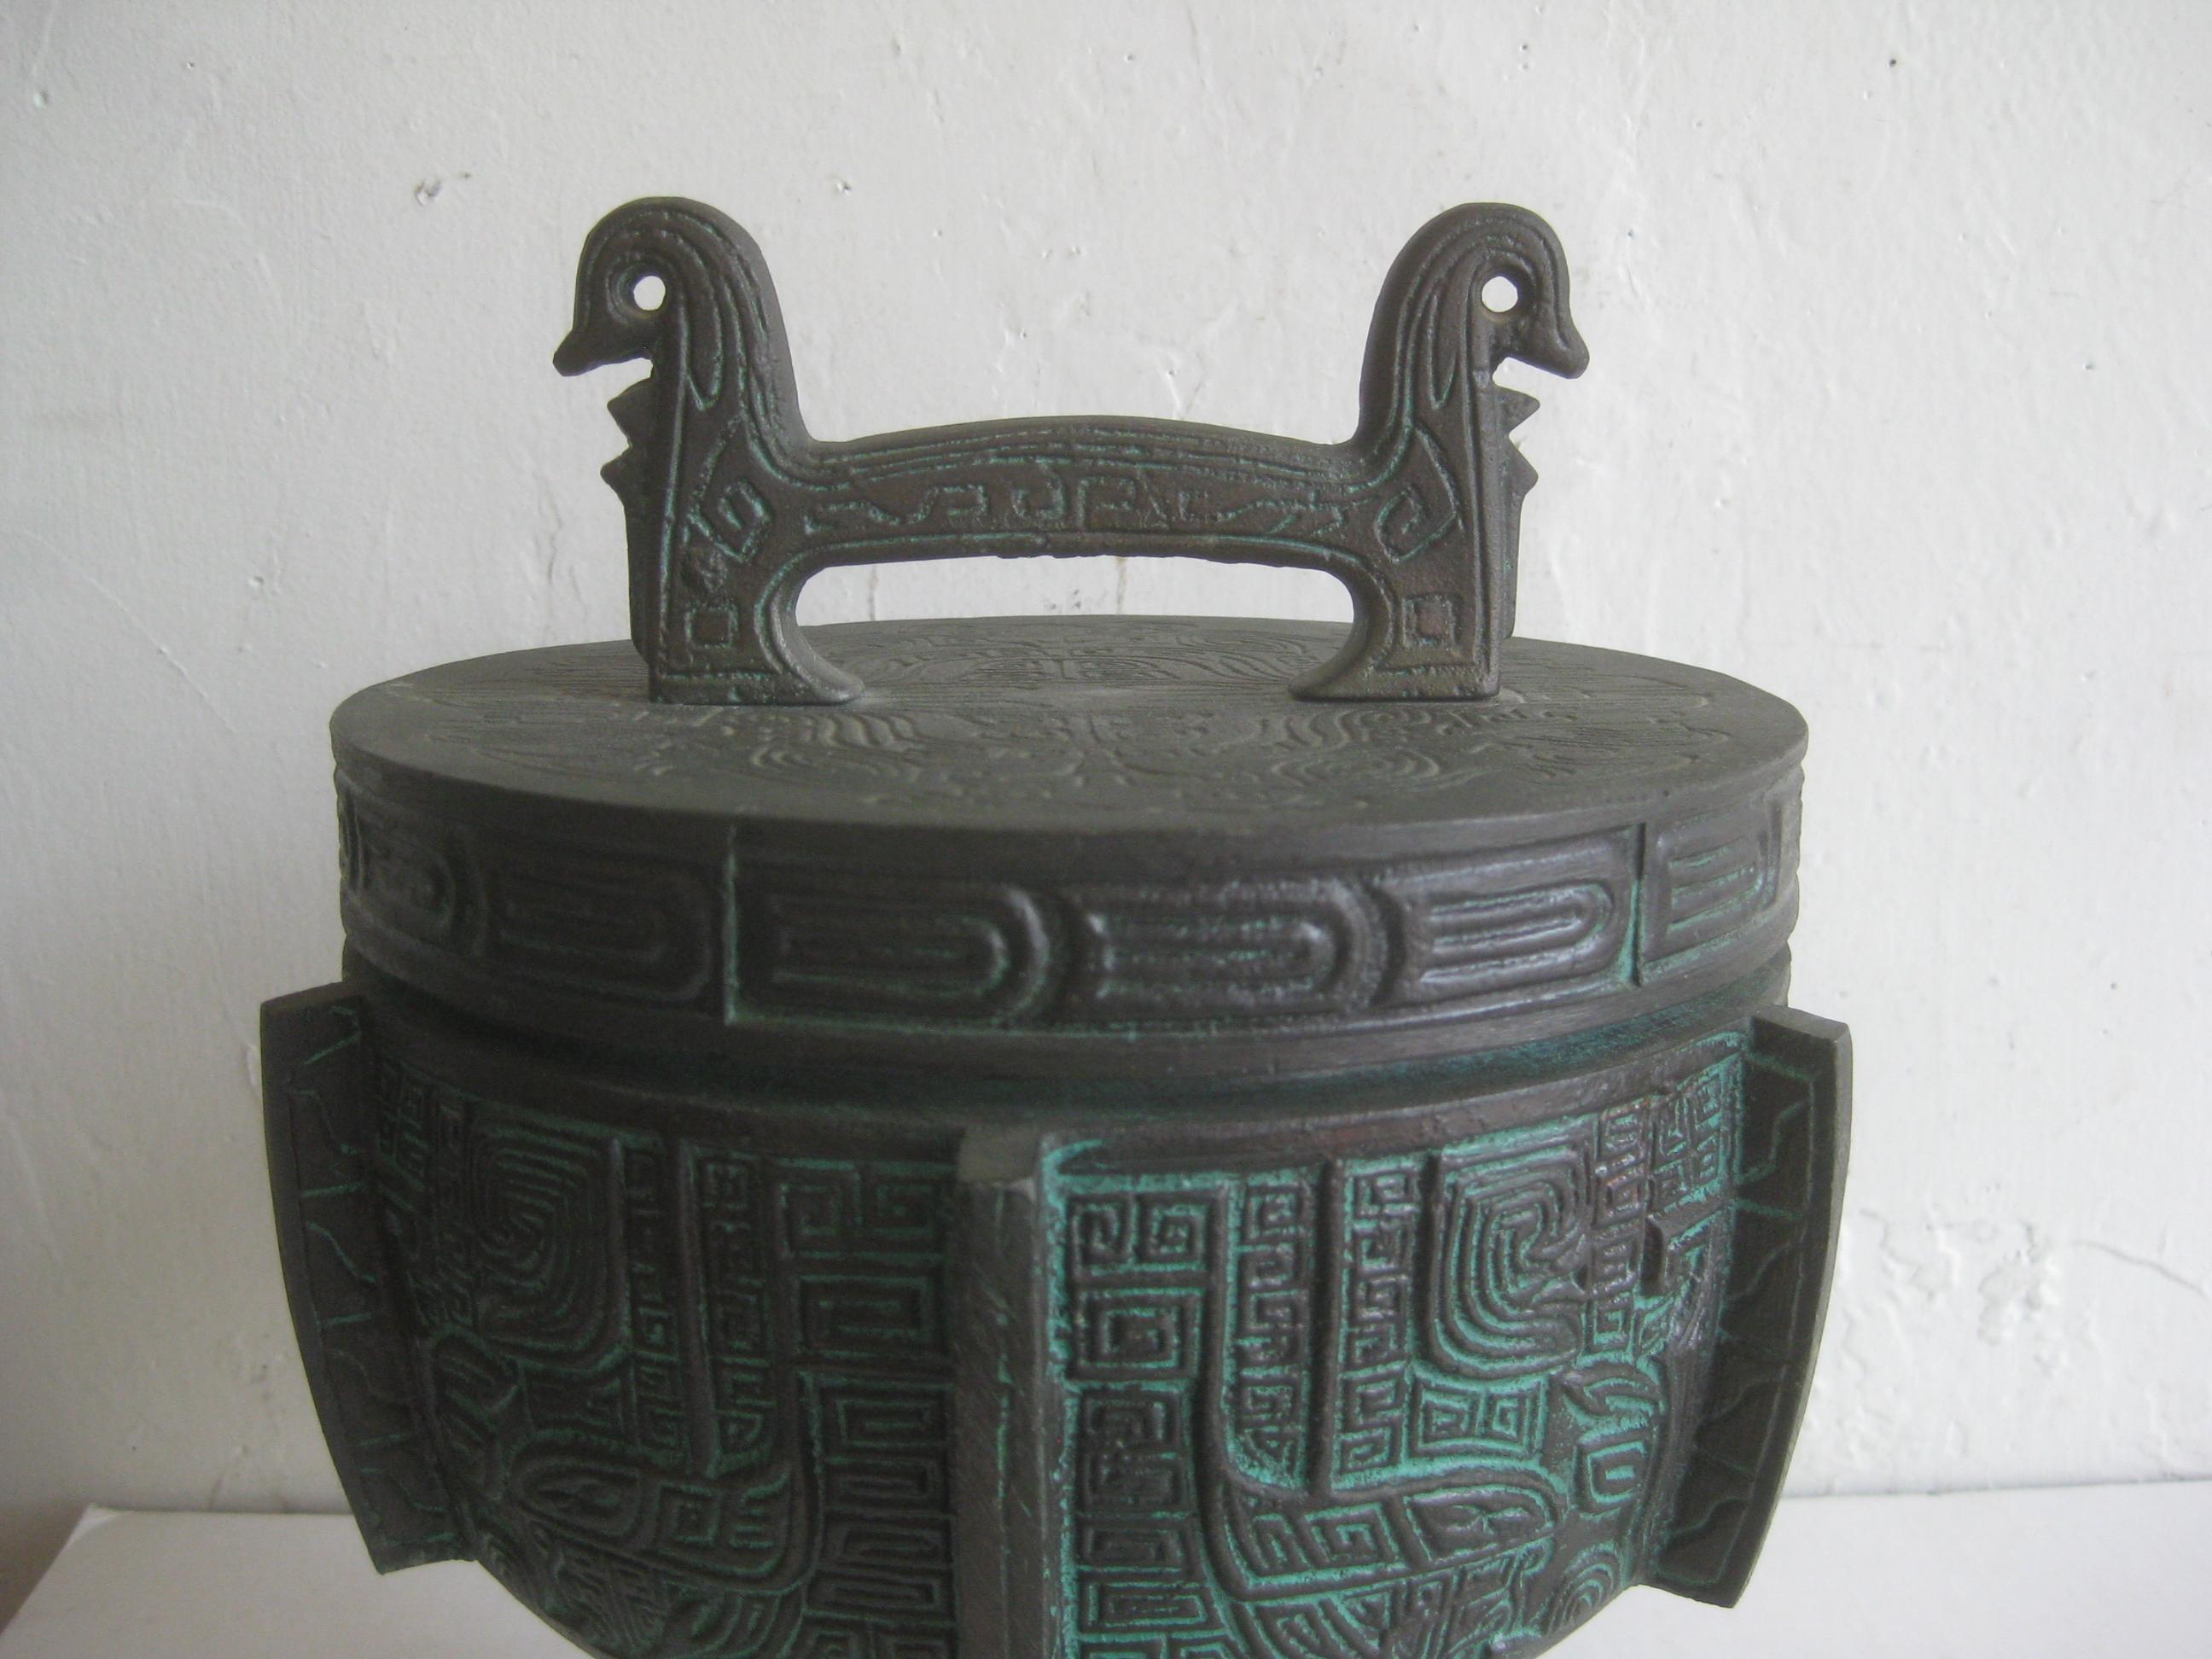 Great ice bucket in the manner of James Mont, circa 1960s. Has a Chinese/Asian design with a verdigris finish. Ice bucket is in excellent shape with very light use over the years. Made of metal with a bronze patina finish. Great painted green